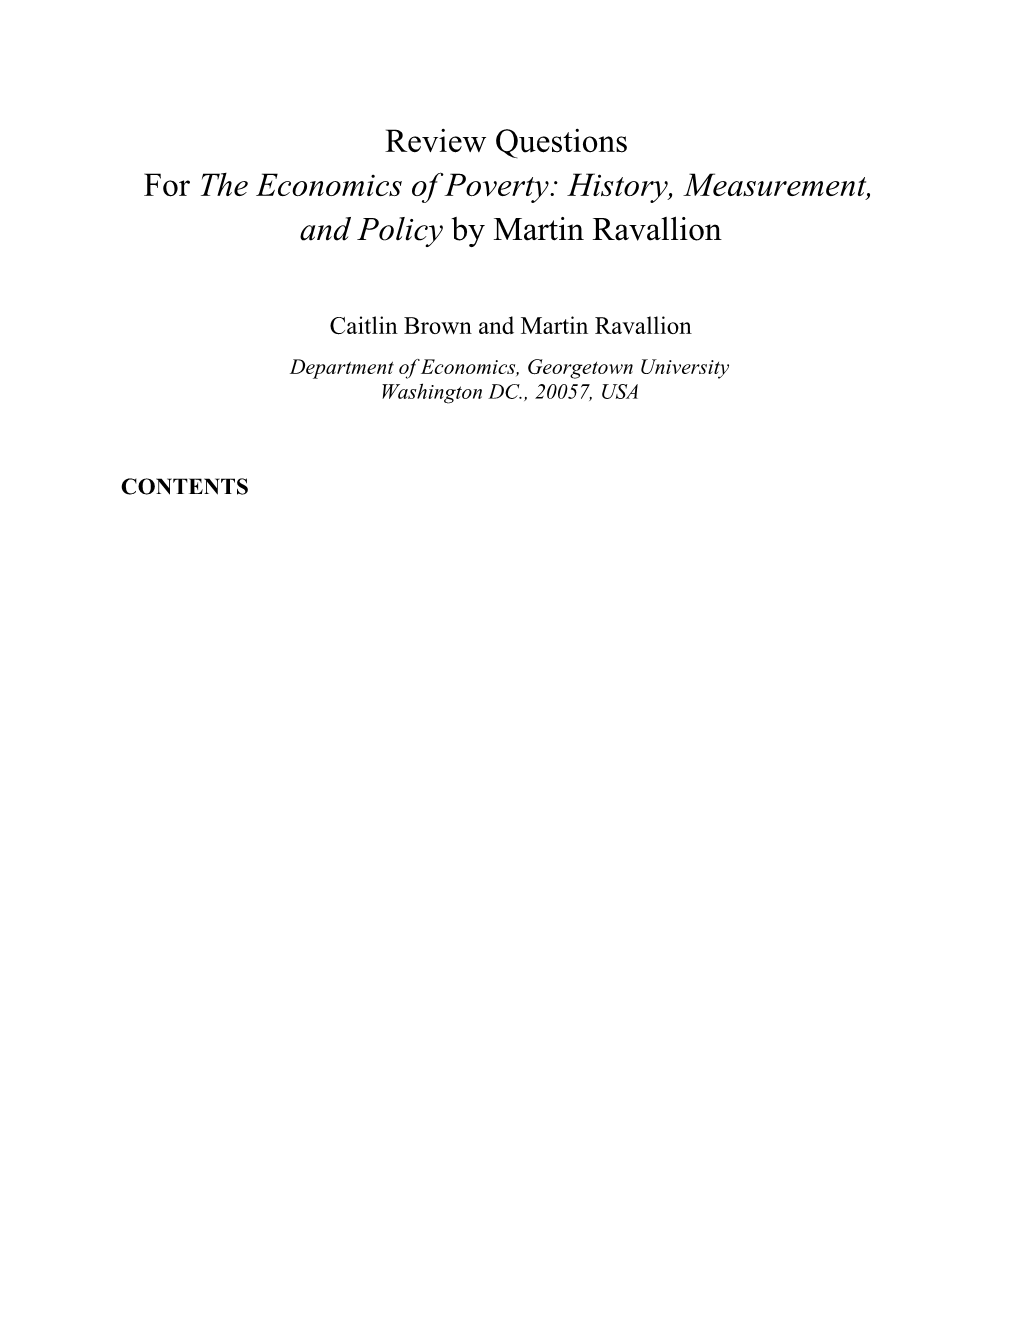 For the Economics of Poverty: History, Measurement, and Policy by Martin Ravallion